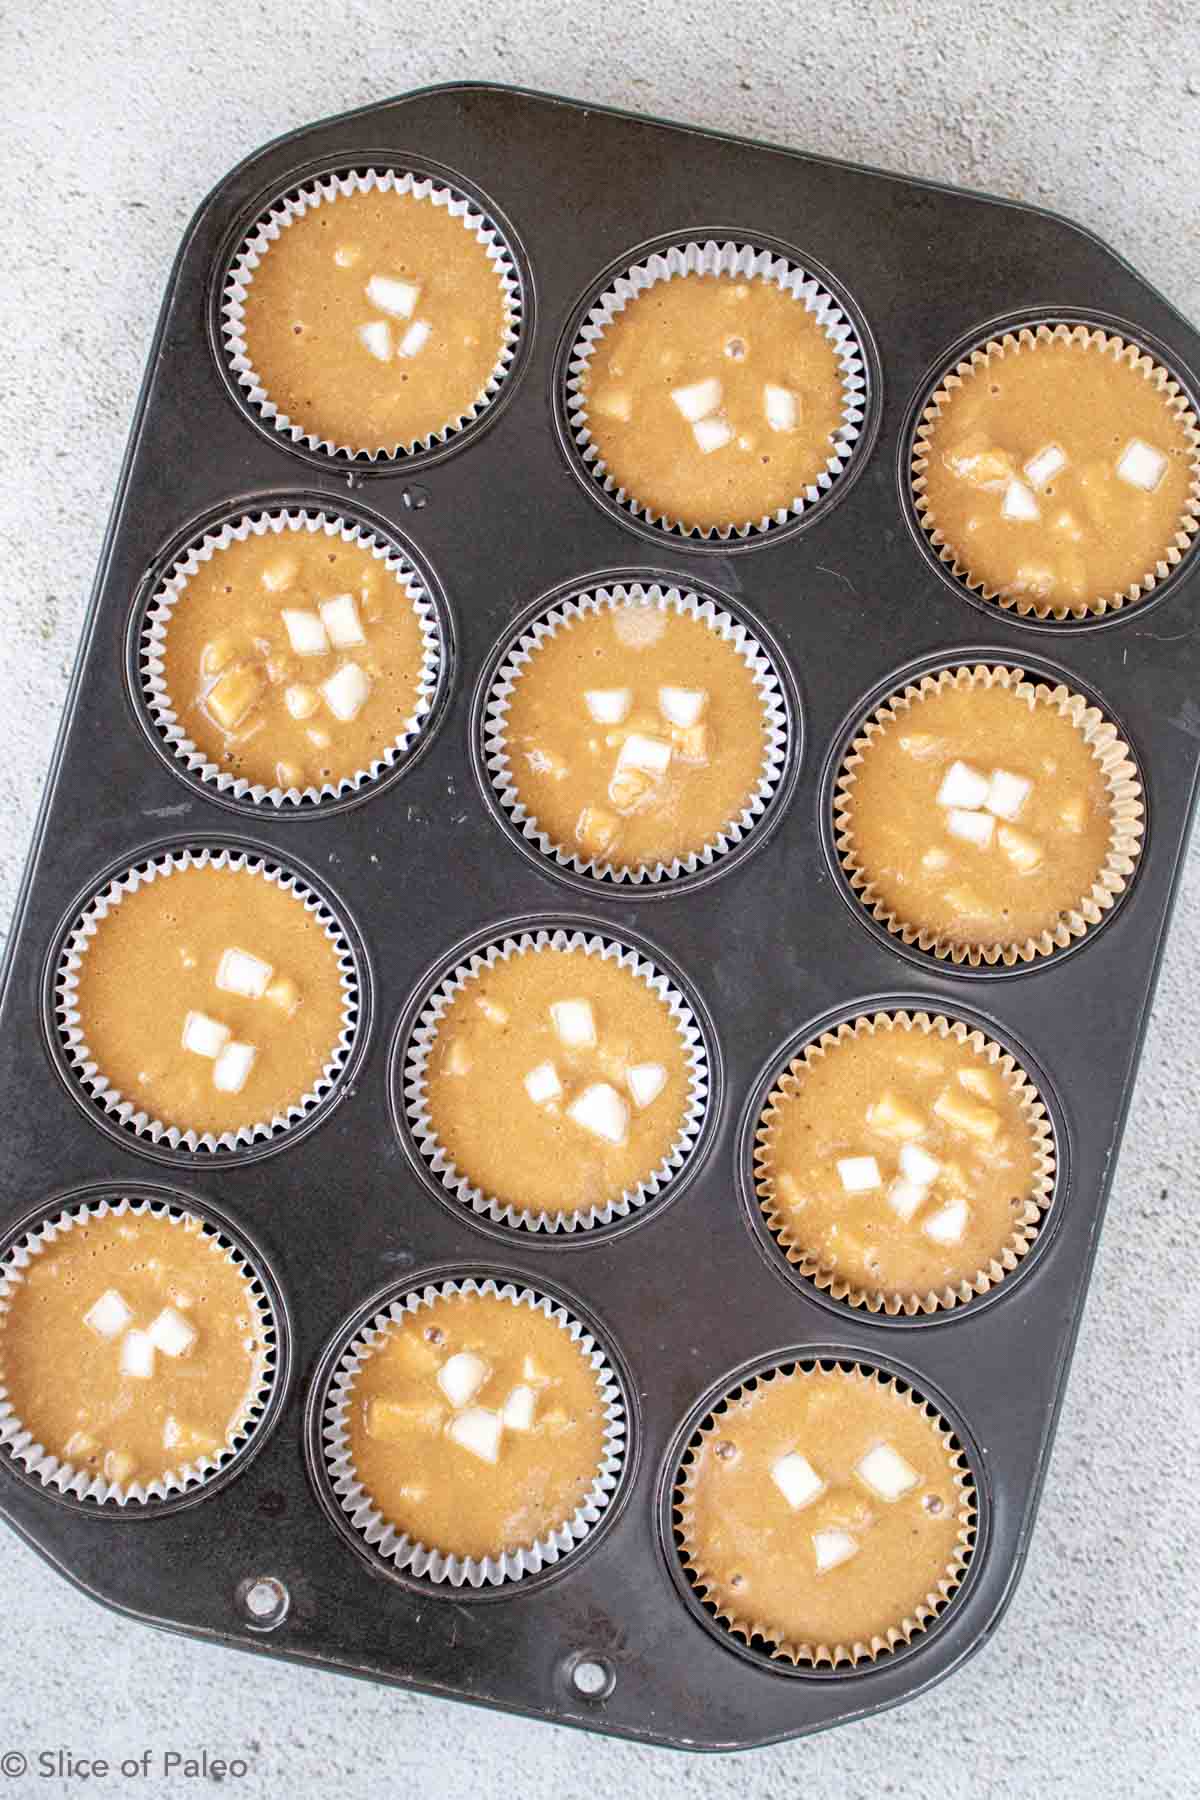 Paleo Ginger Pear Muffins batter poured into muffin pan